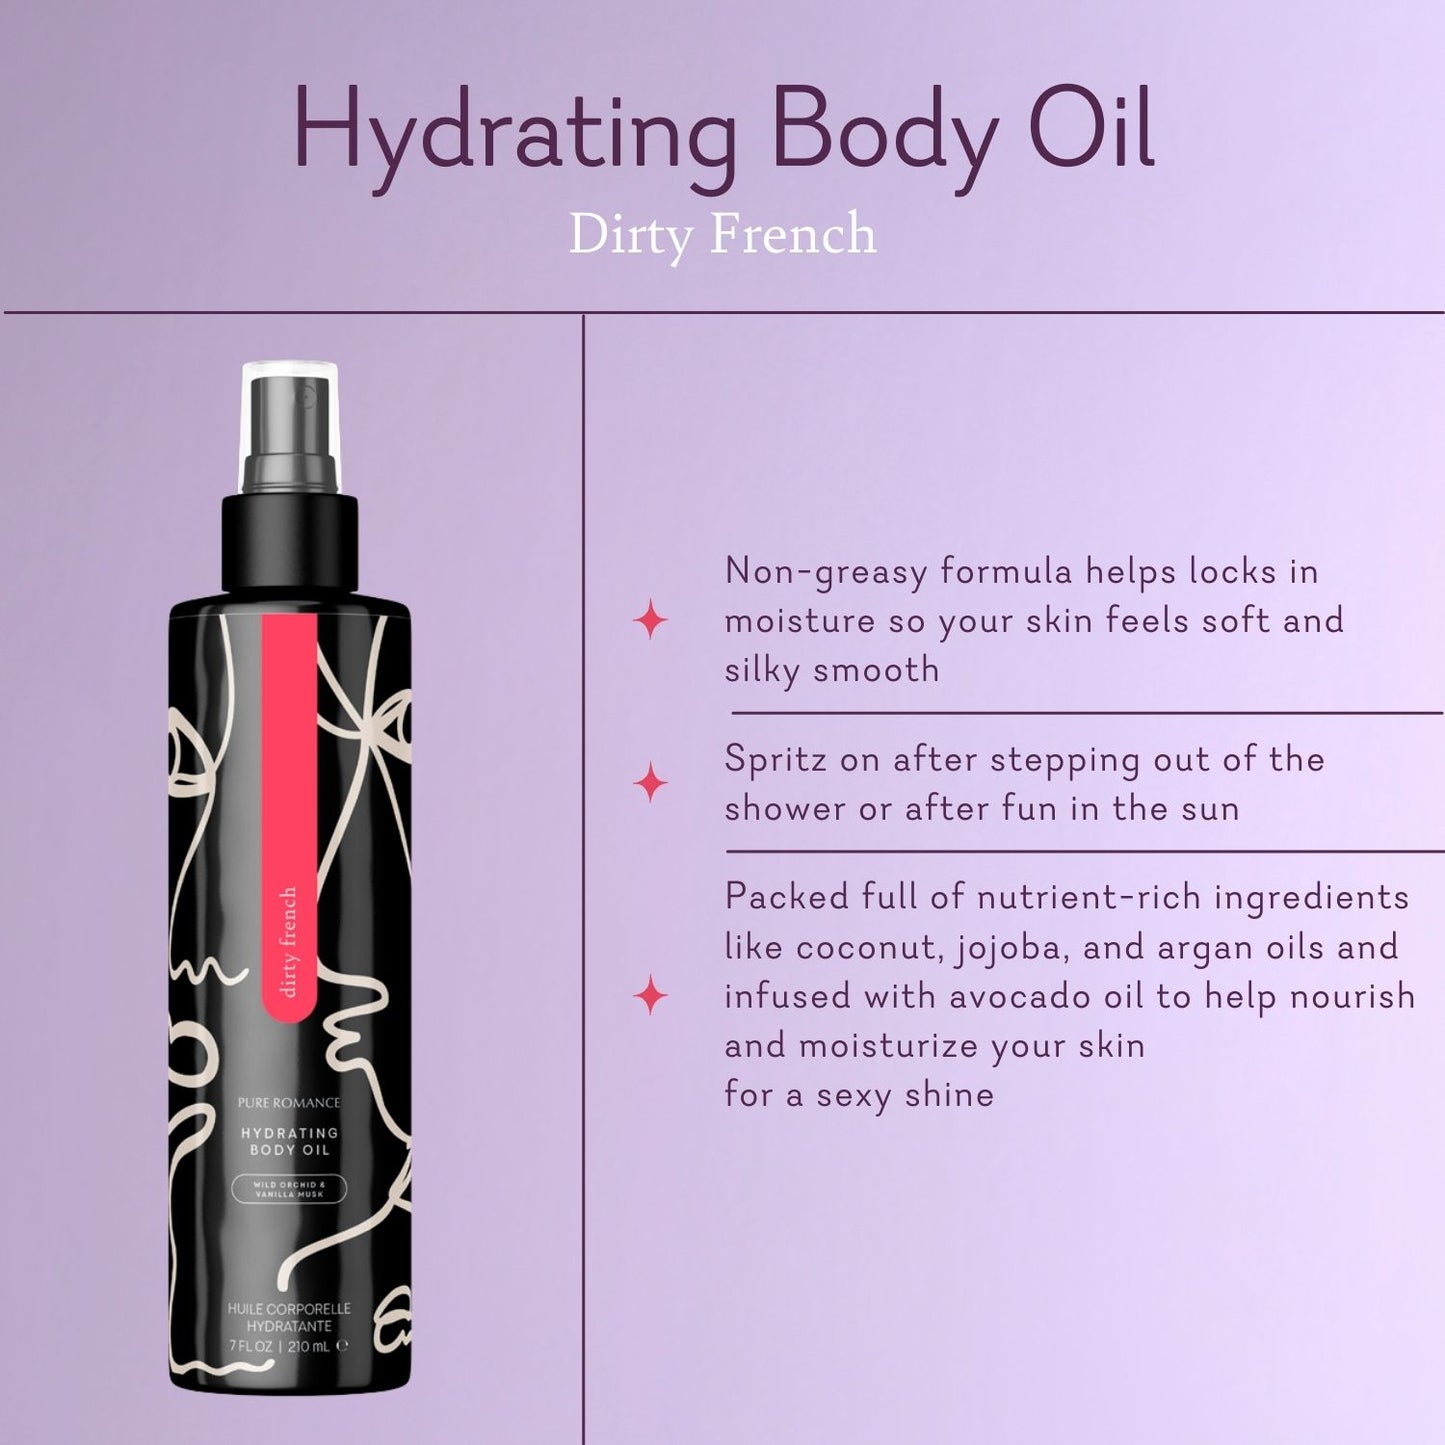 Hydrating Body Oil - Dirty French